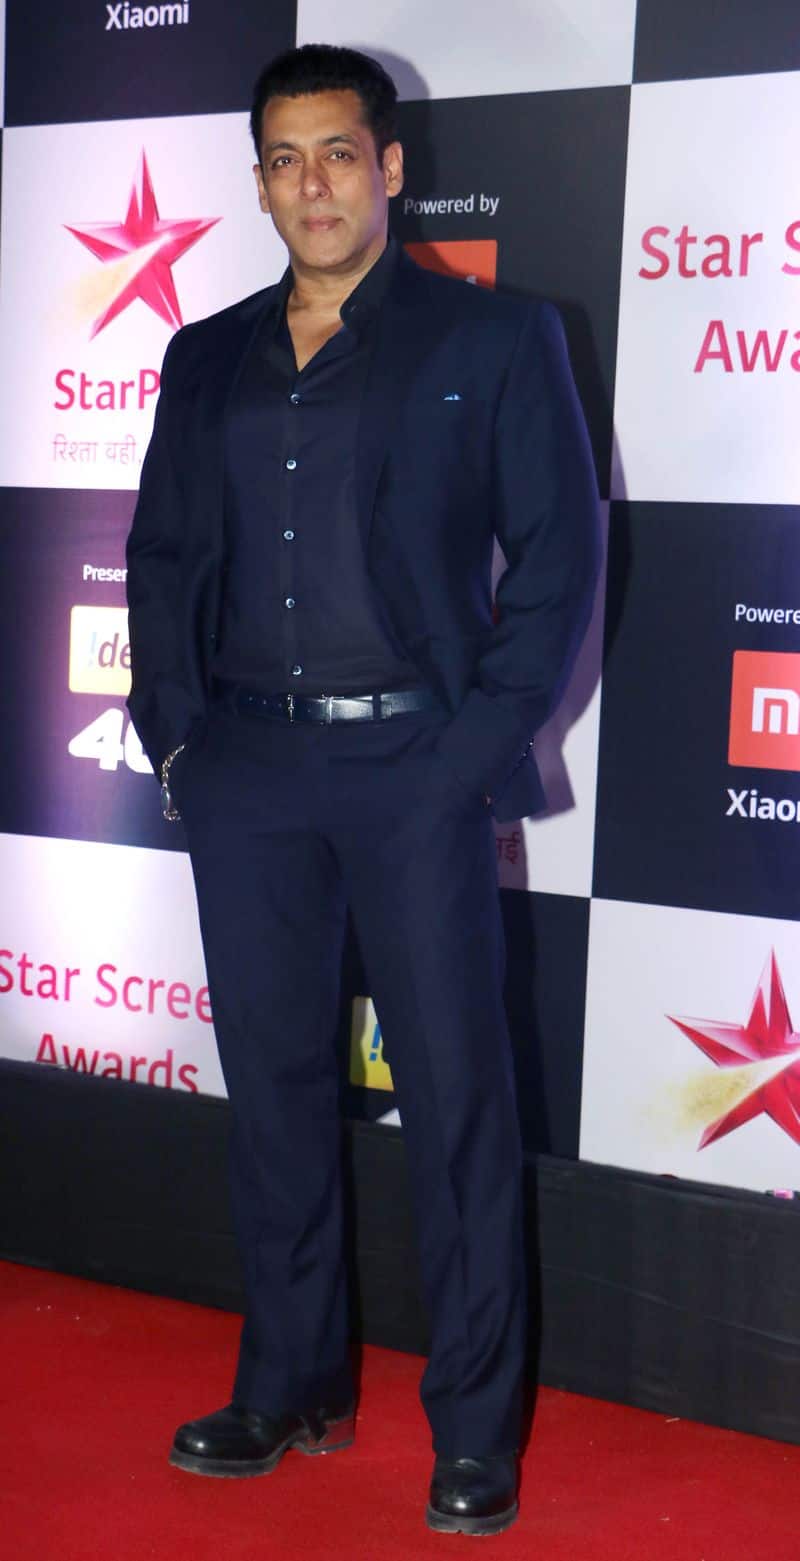 Salman Khan dressed in an all navy-blue outfit with his trademark chain bracelet.